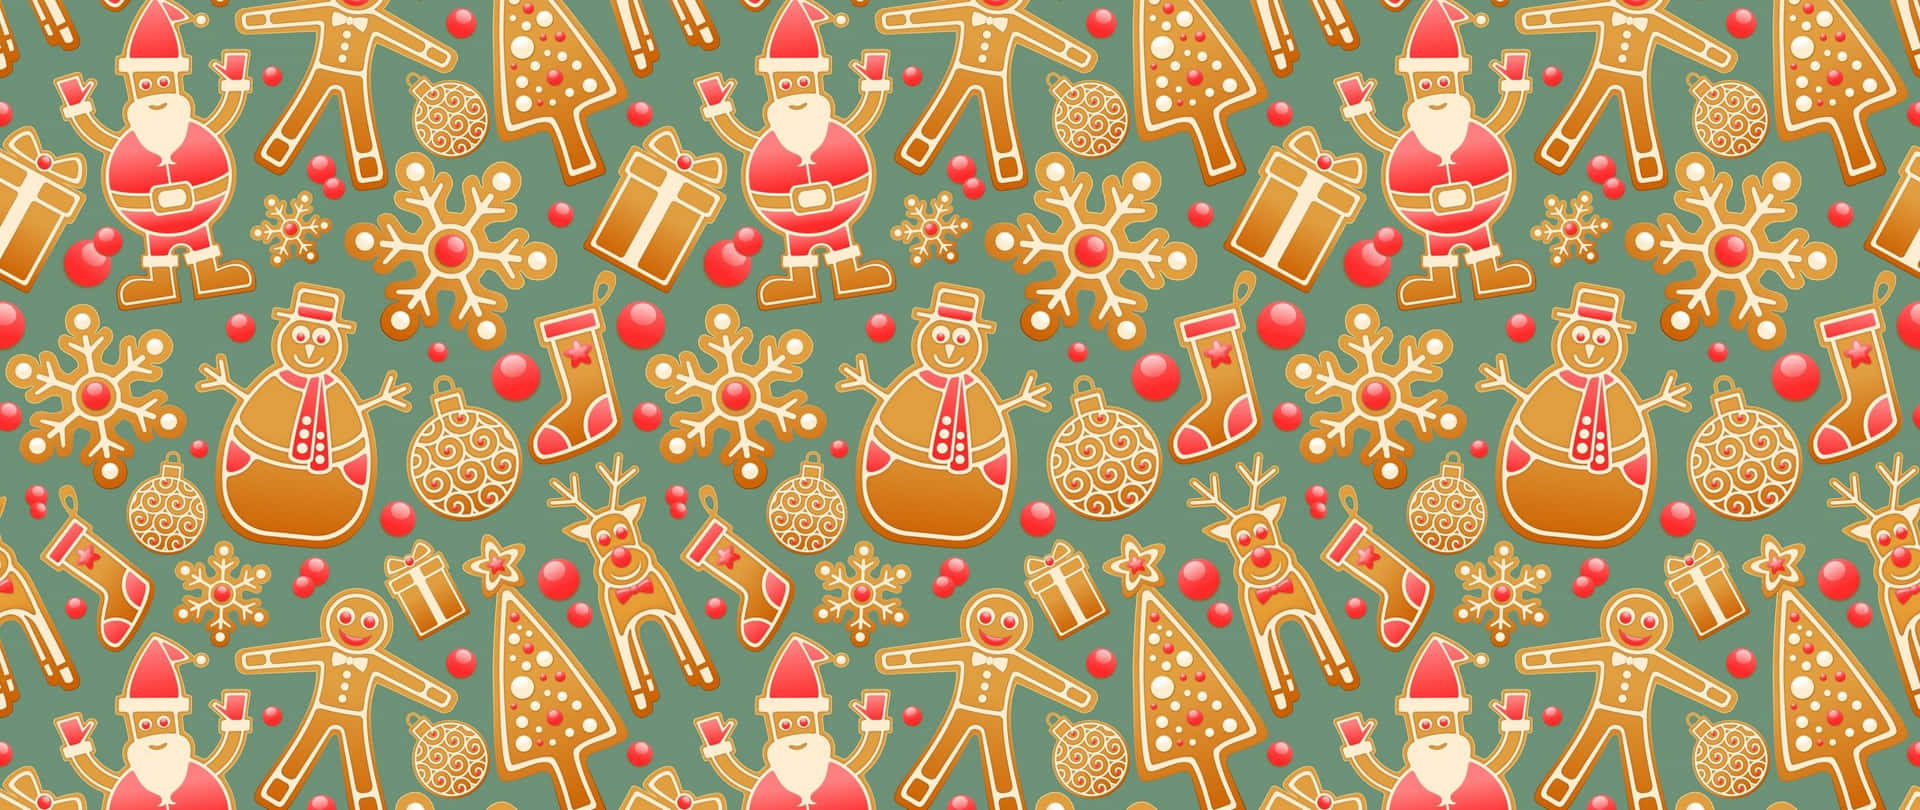 Celebrate the Holidays with a Festive Christmas Pattern Wallpaper